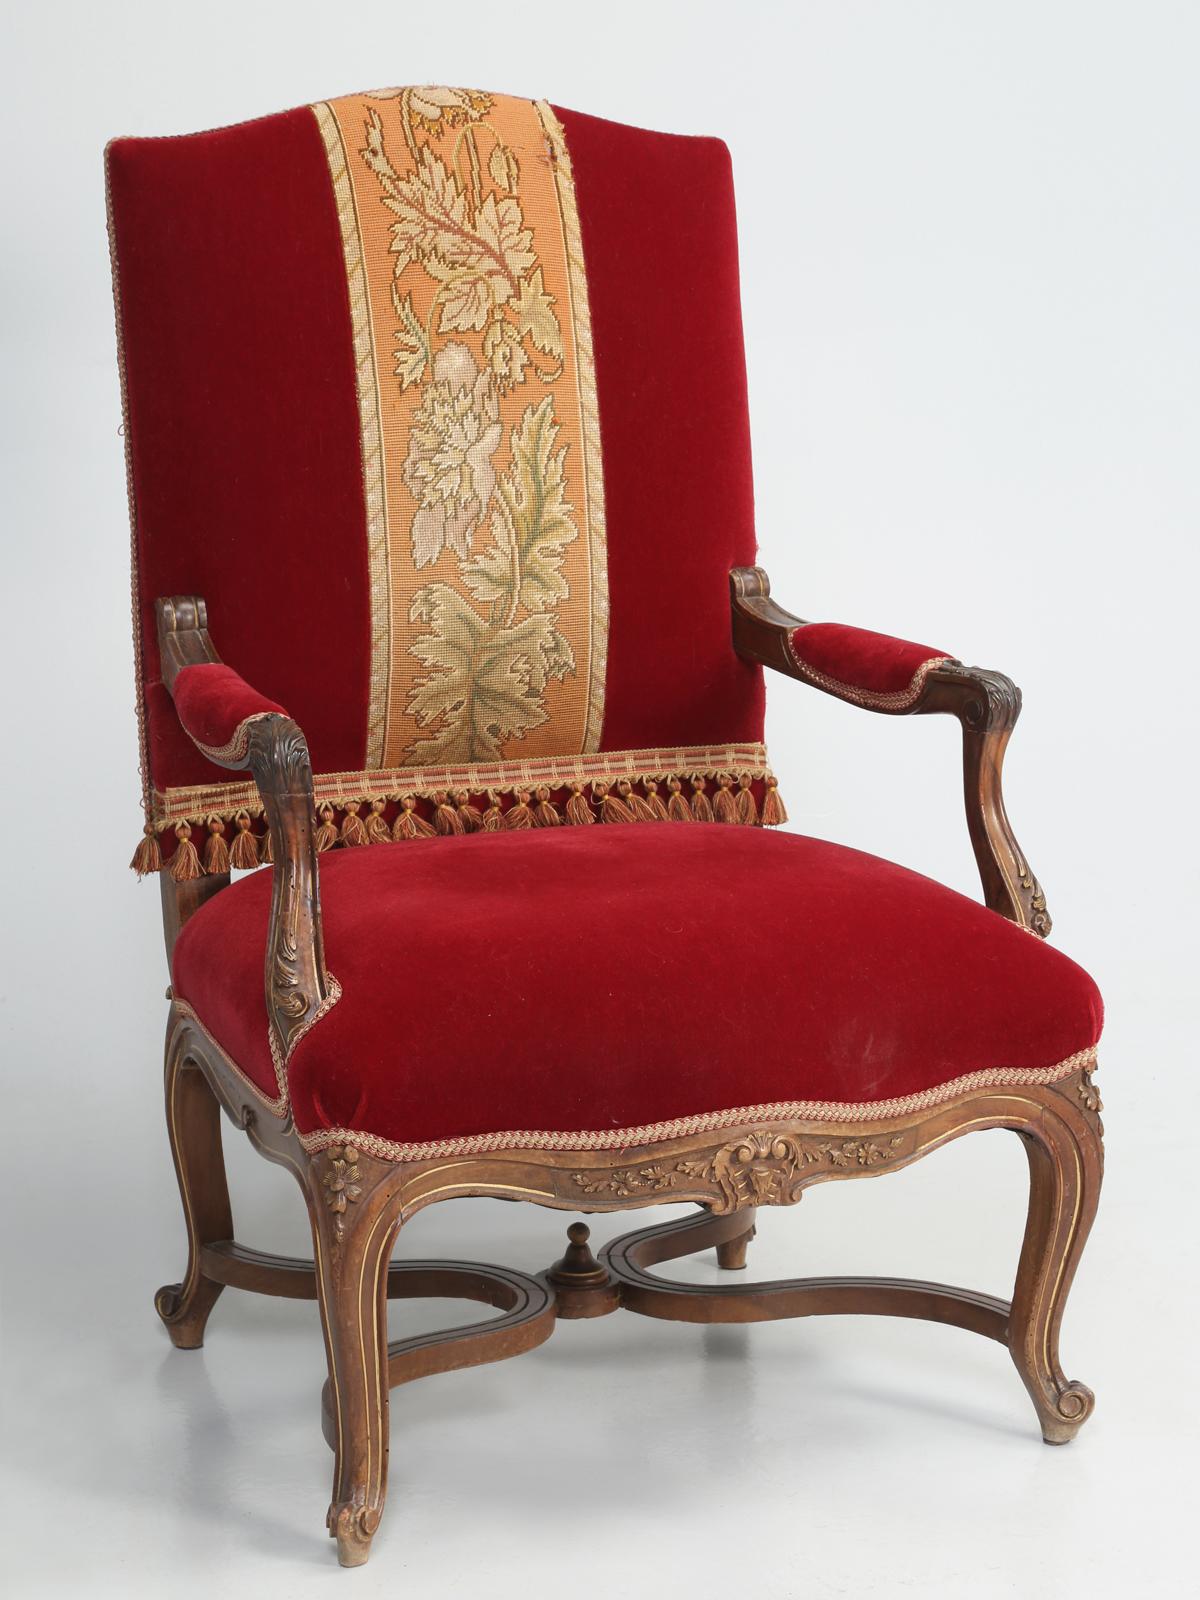 Antique Italian Louis XV style armchair or as we commonly call them a throne chair. We have just received several antique Italian parlor chairs that are all from the same home and appear to have been produced around the same time period. The fabrics